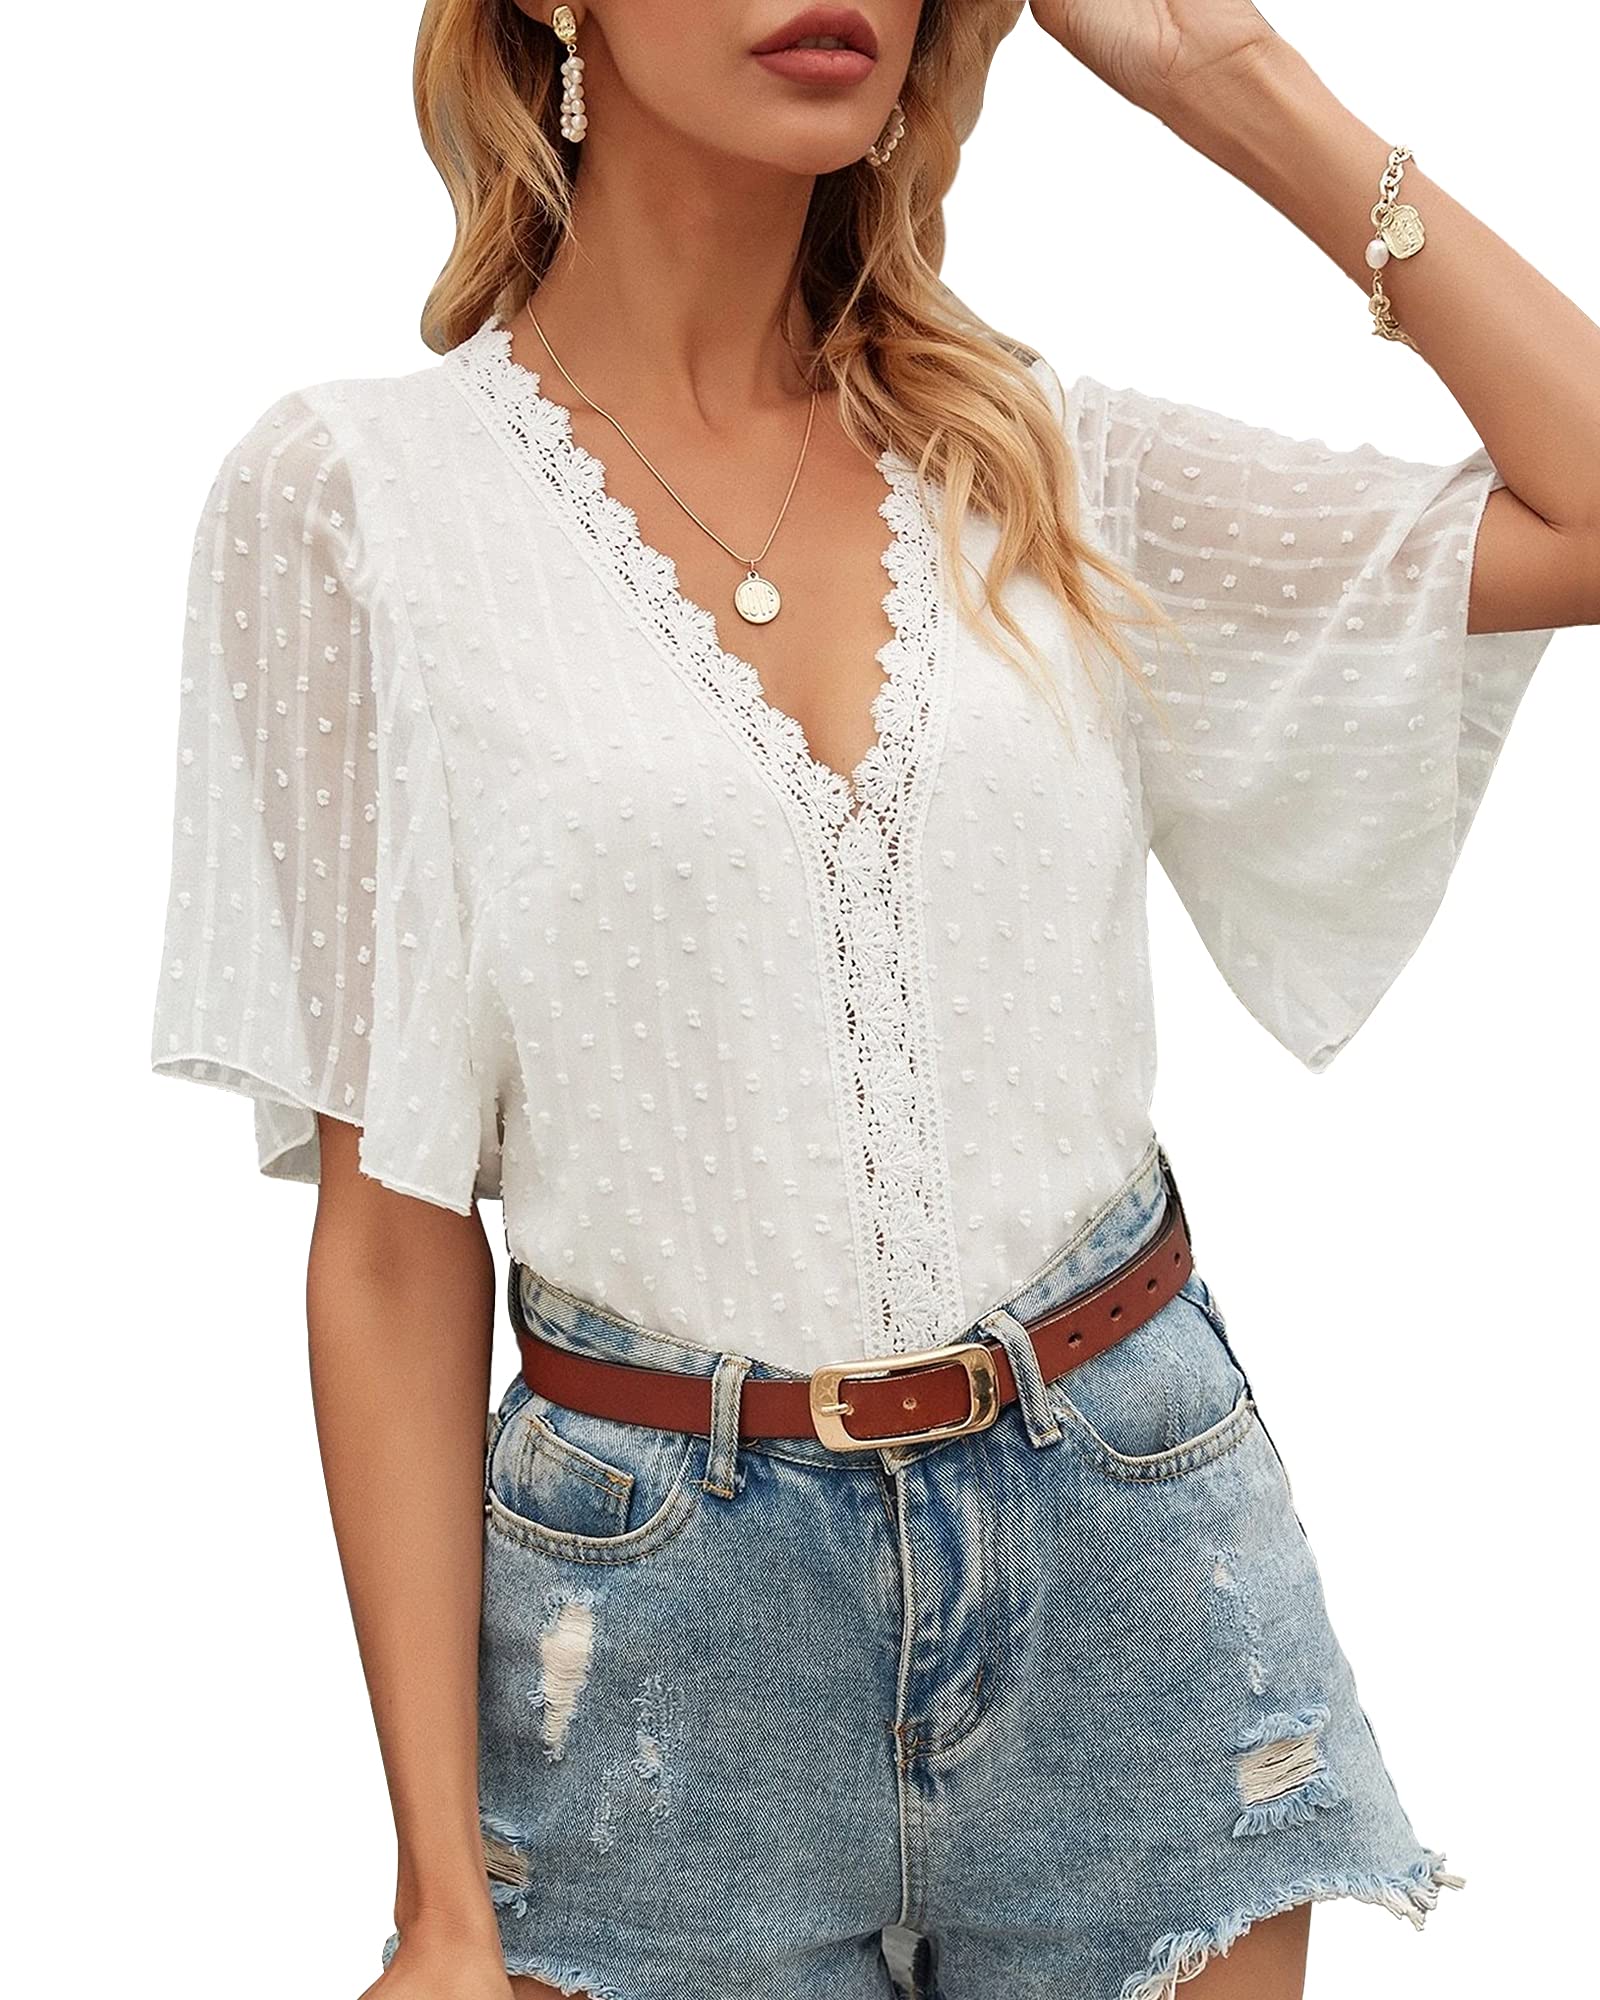 Lace Summer Causal Blouses Shirts